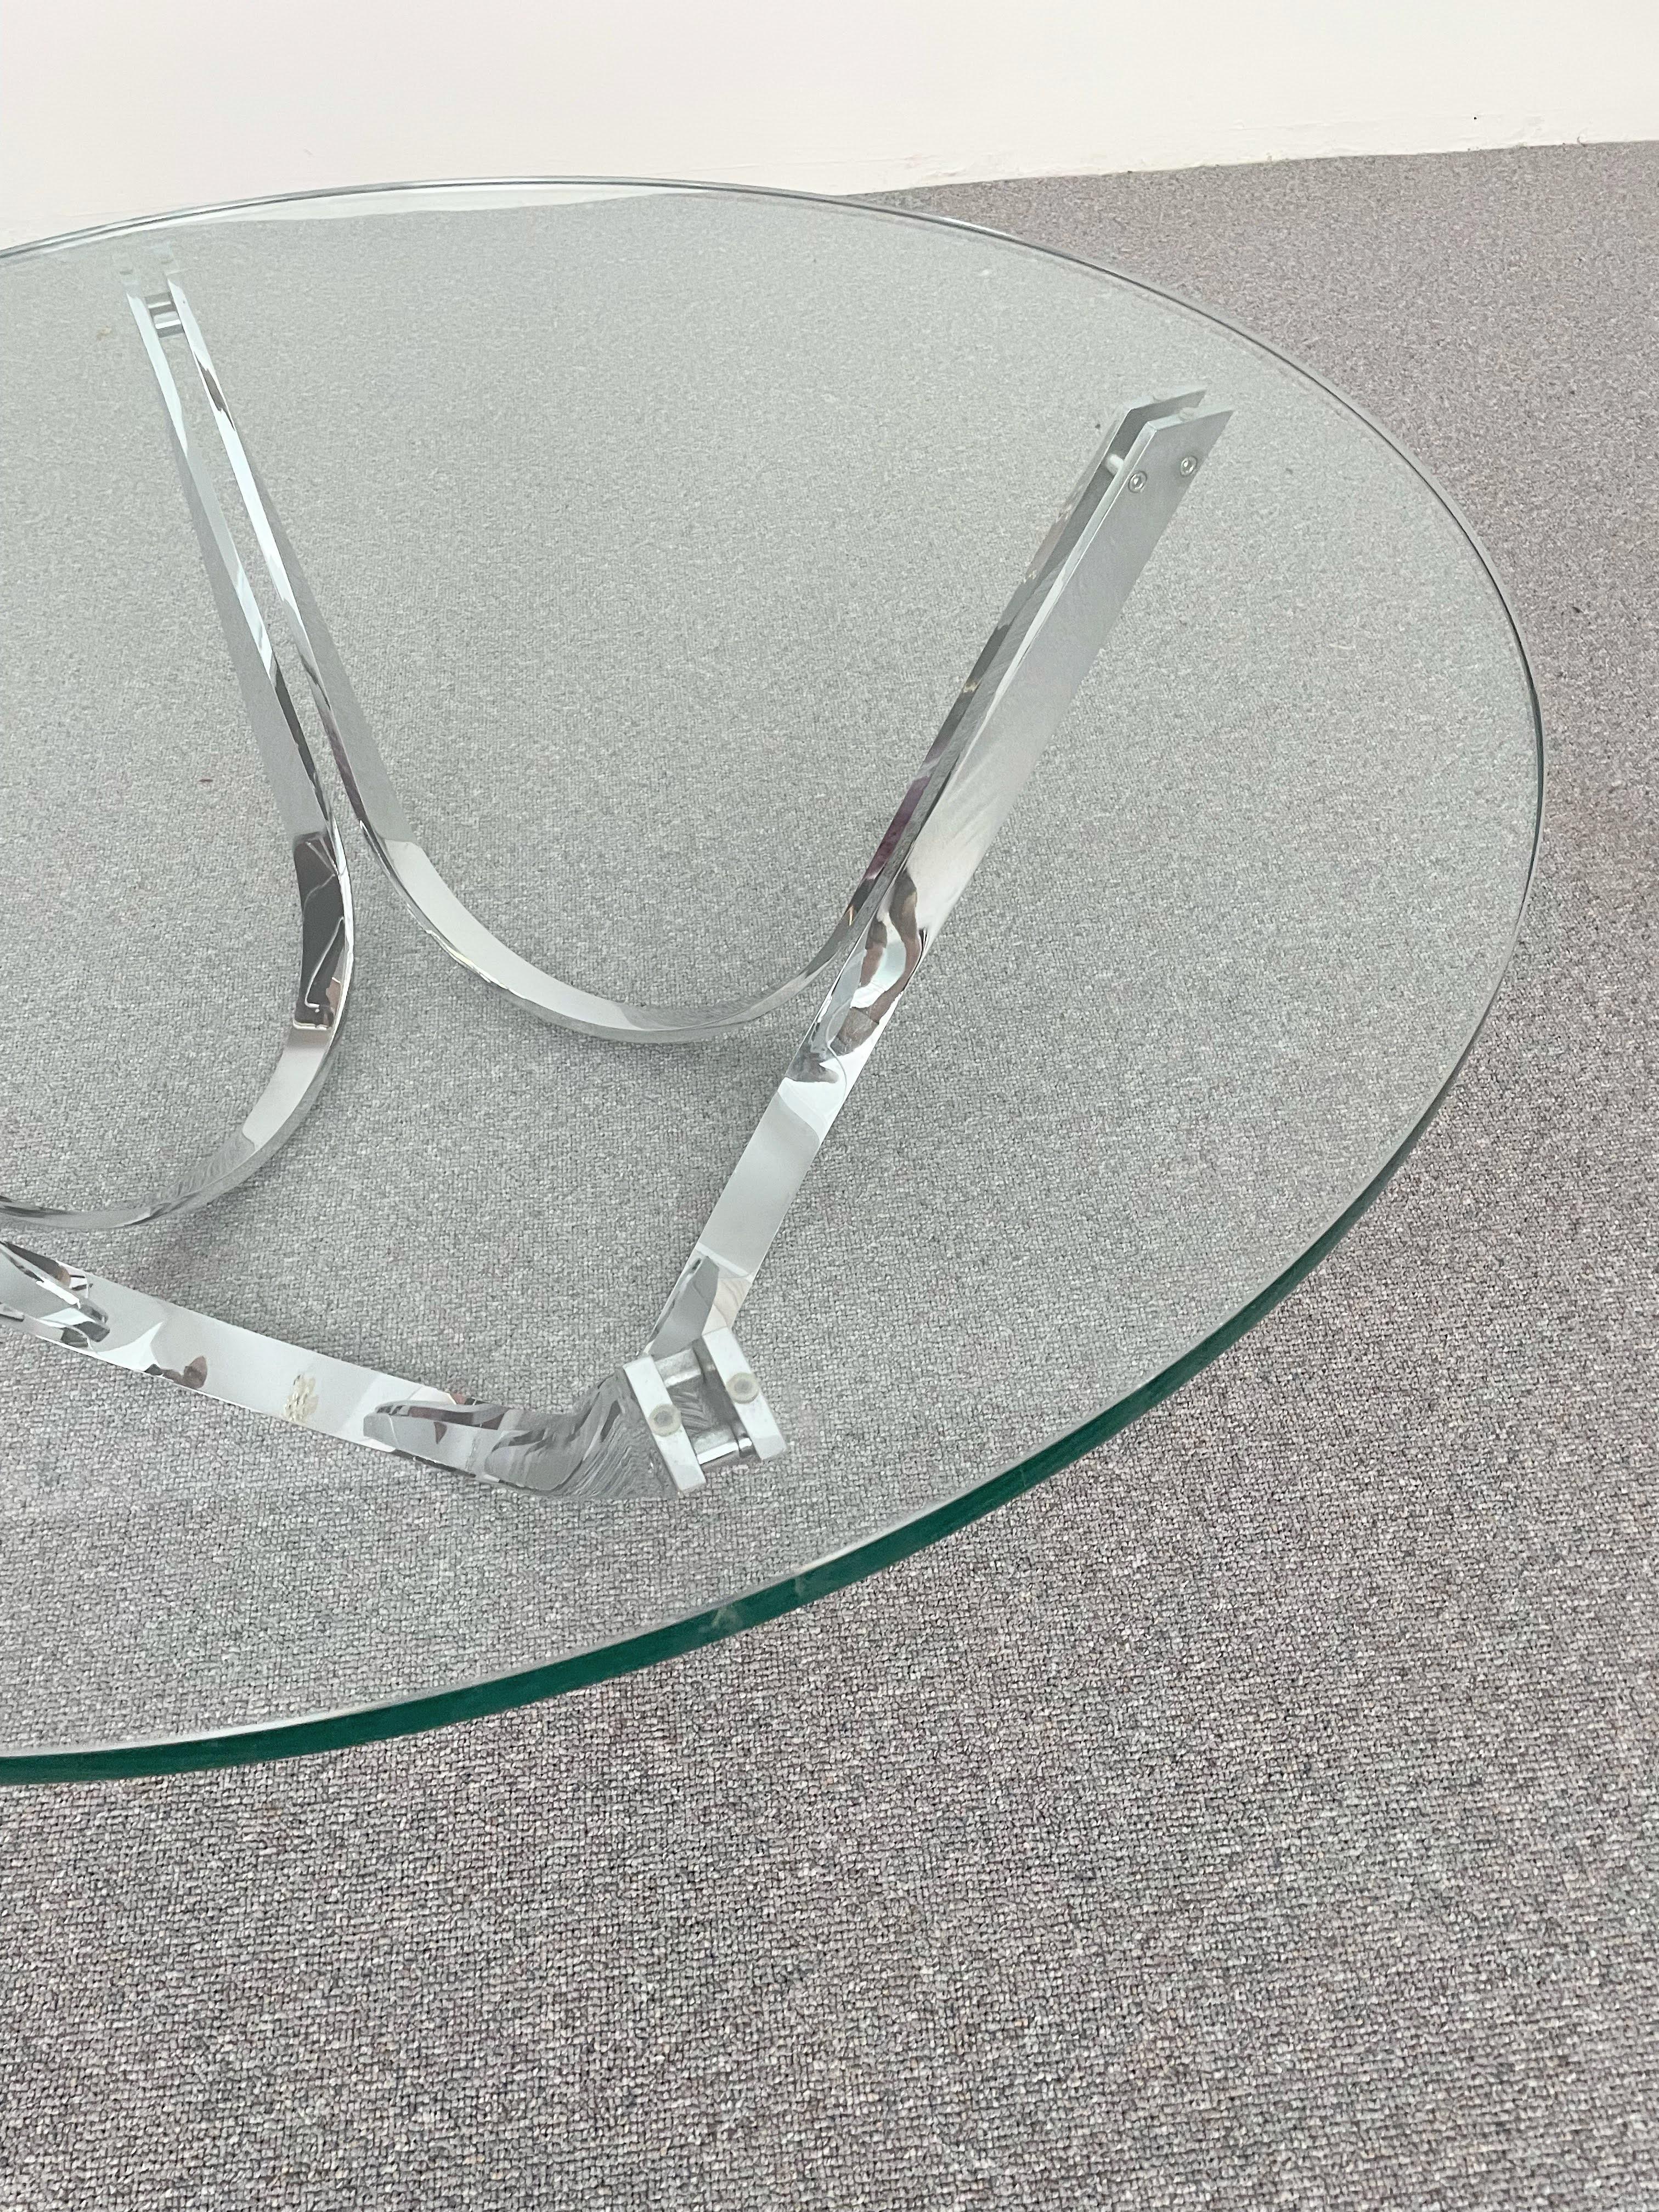 20th Century Modern Glass Cocktail Table by Roger Sprunger for Dunbar 1970